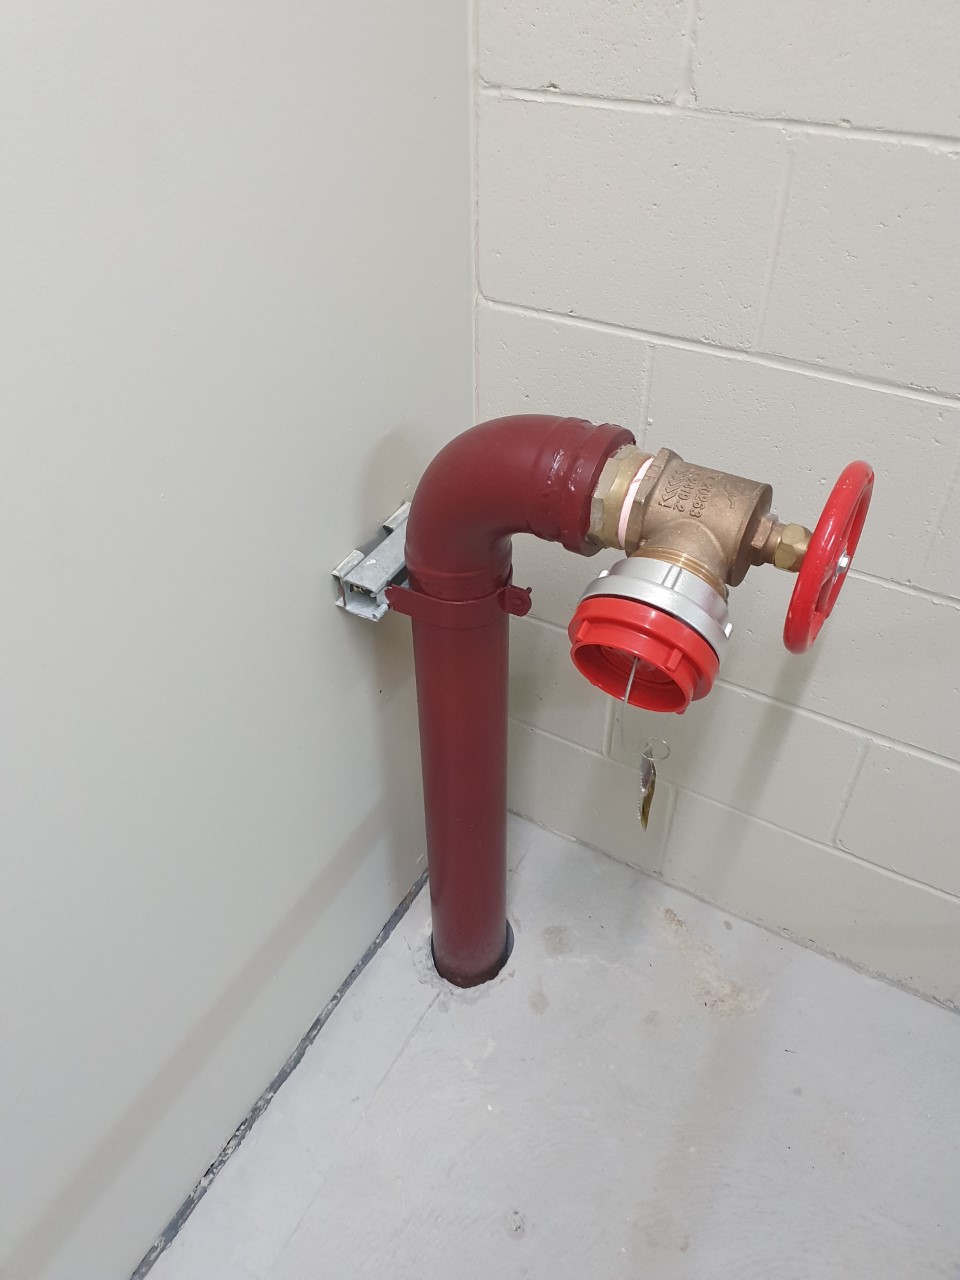 A recently cleaned and serviced fire hydrant in fire stairs